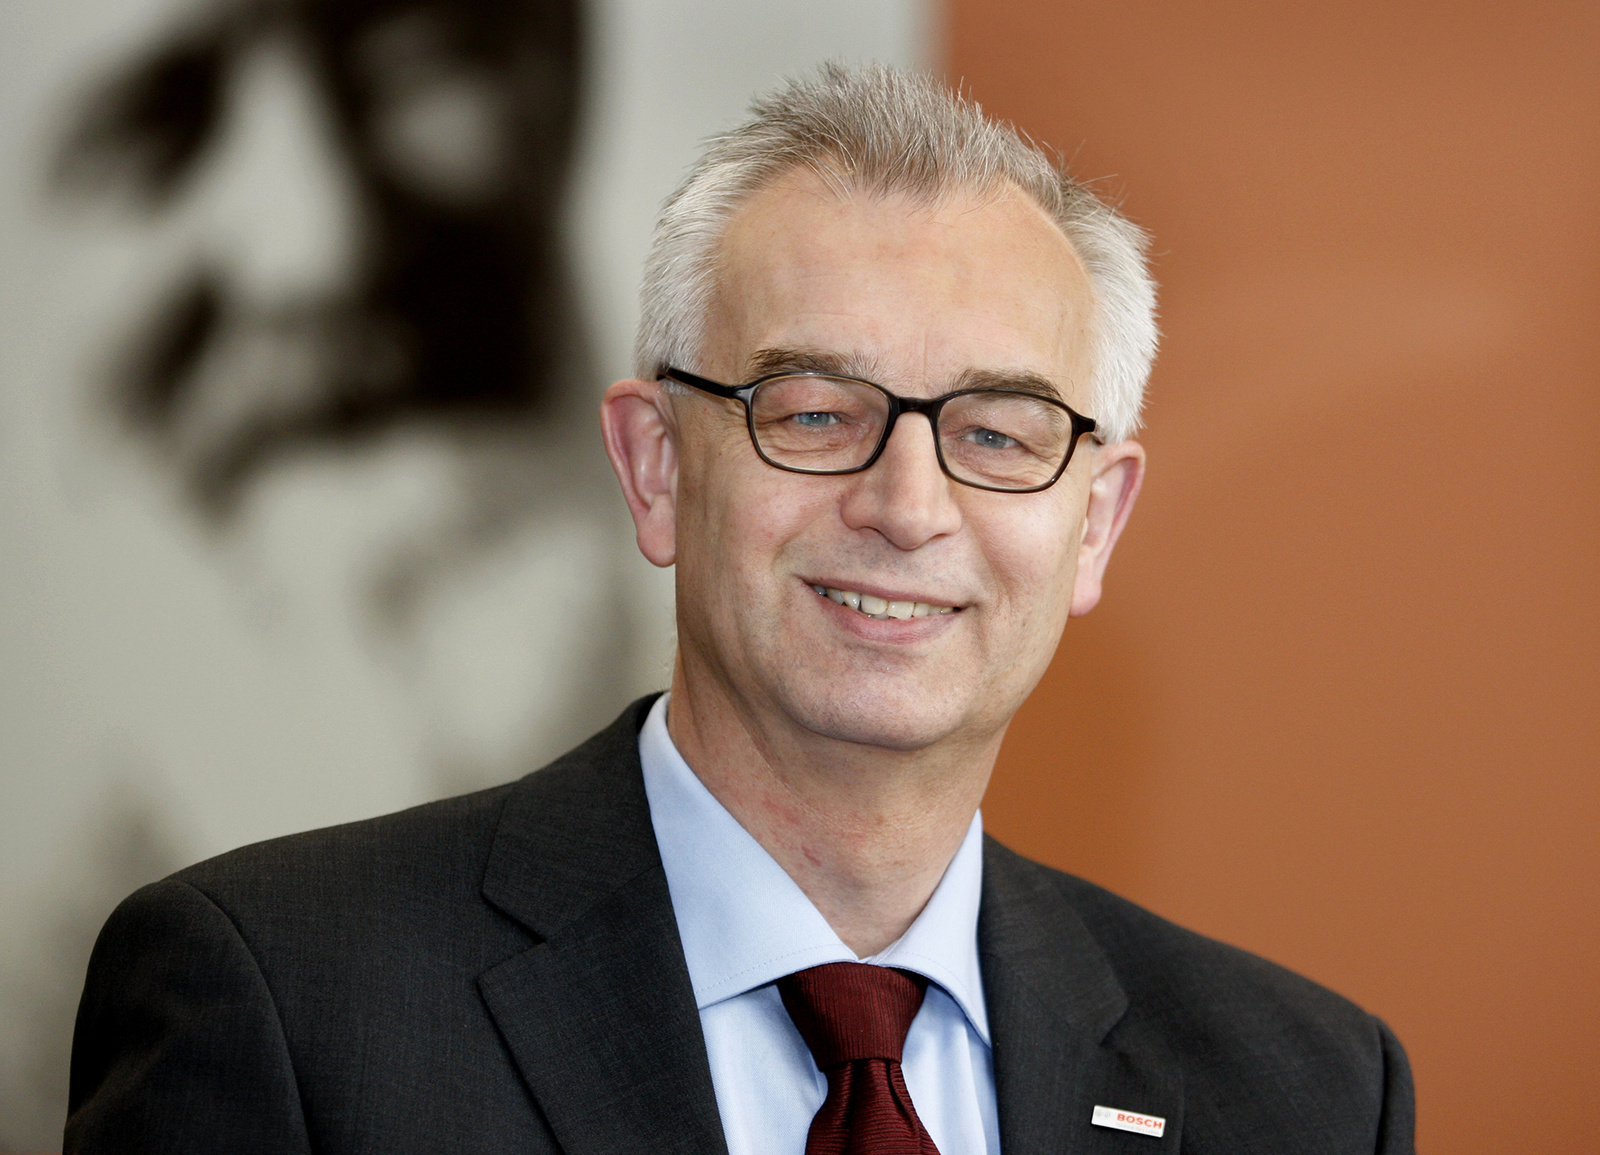 Siegfried Czock, Head of Occupational and Professional Training Policies